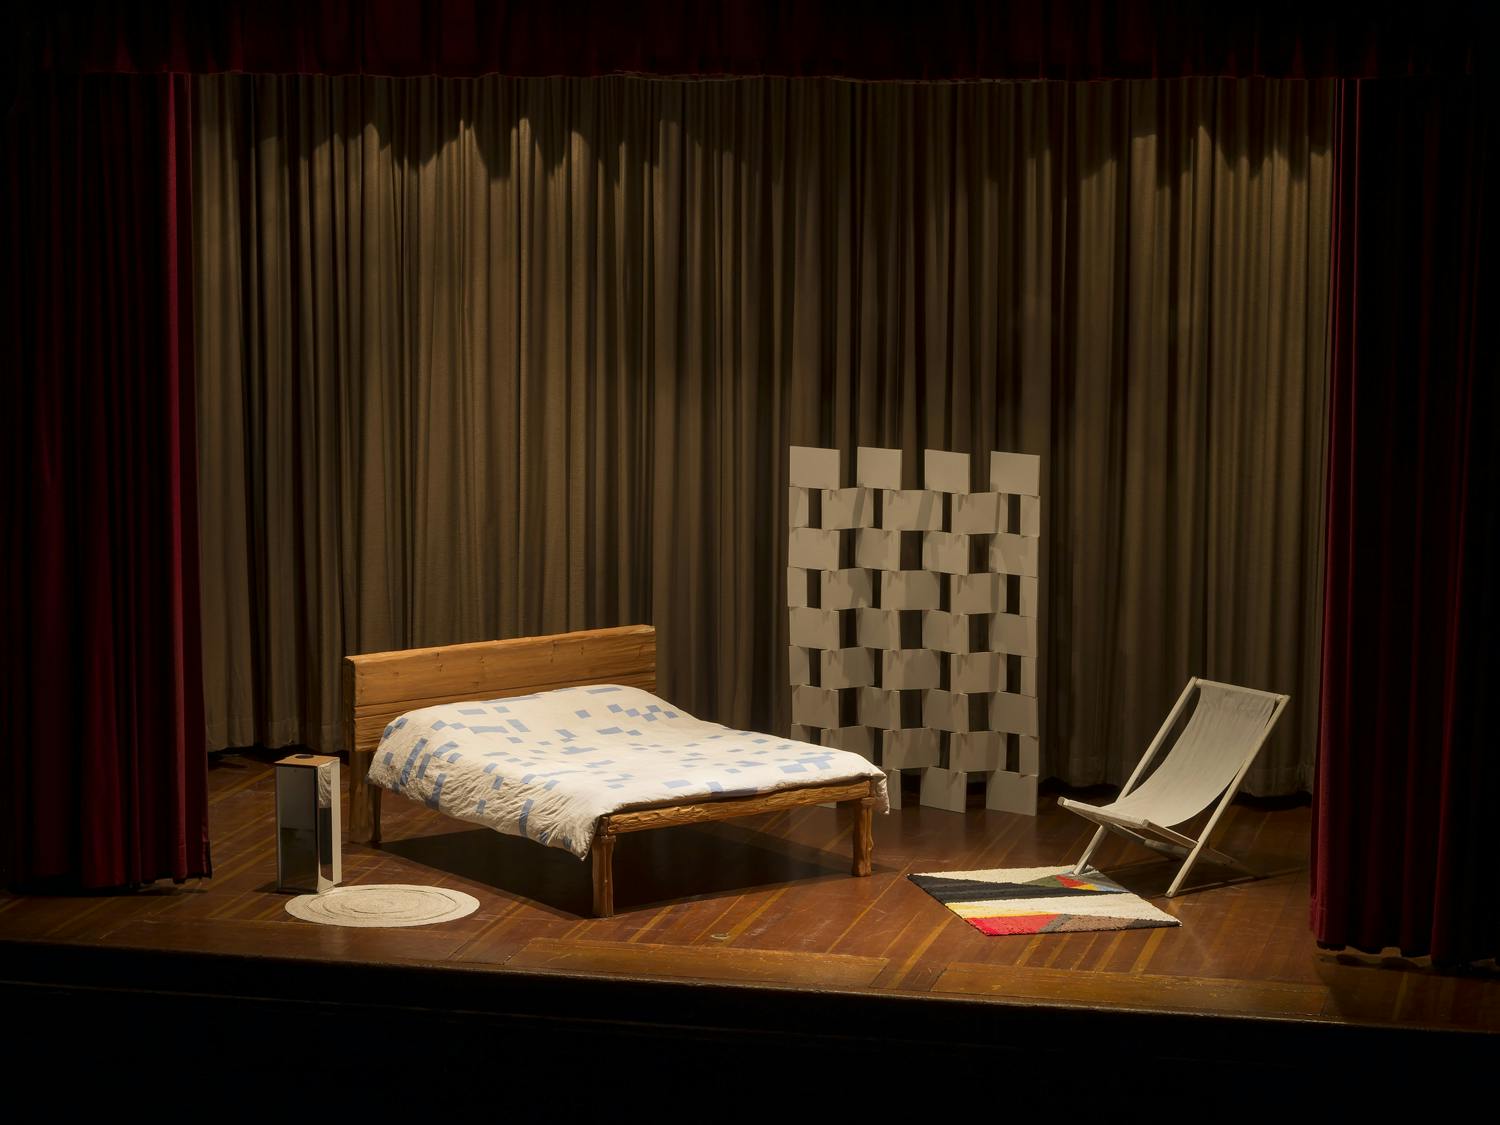 An image of a stage set framed by theatre curtains with brown curtains in the background. On stage is a set of a bedroom containing a bed, carpets, a small table, a room divider, and lounge chair.